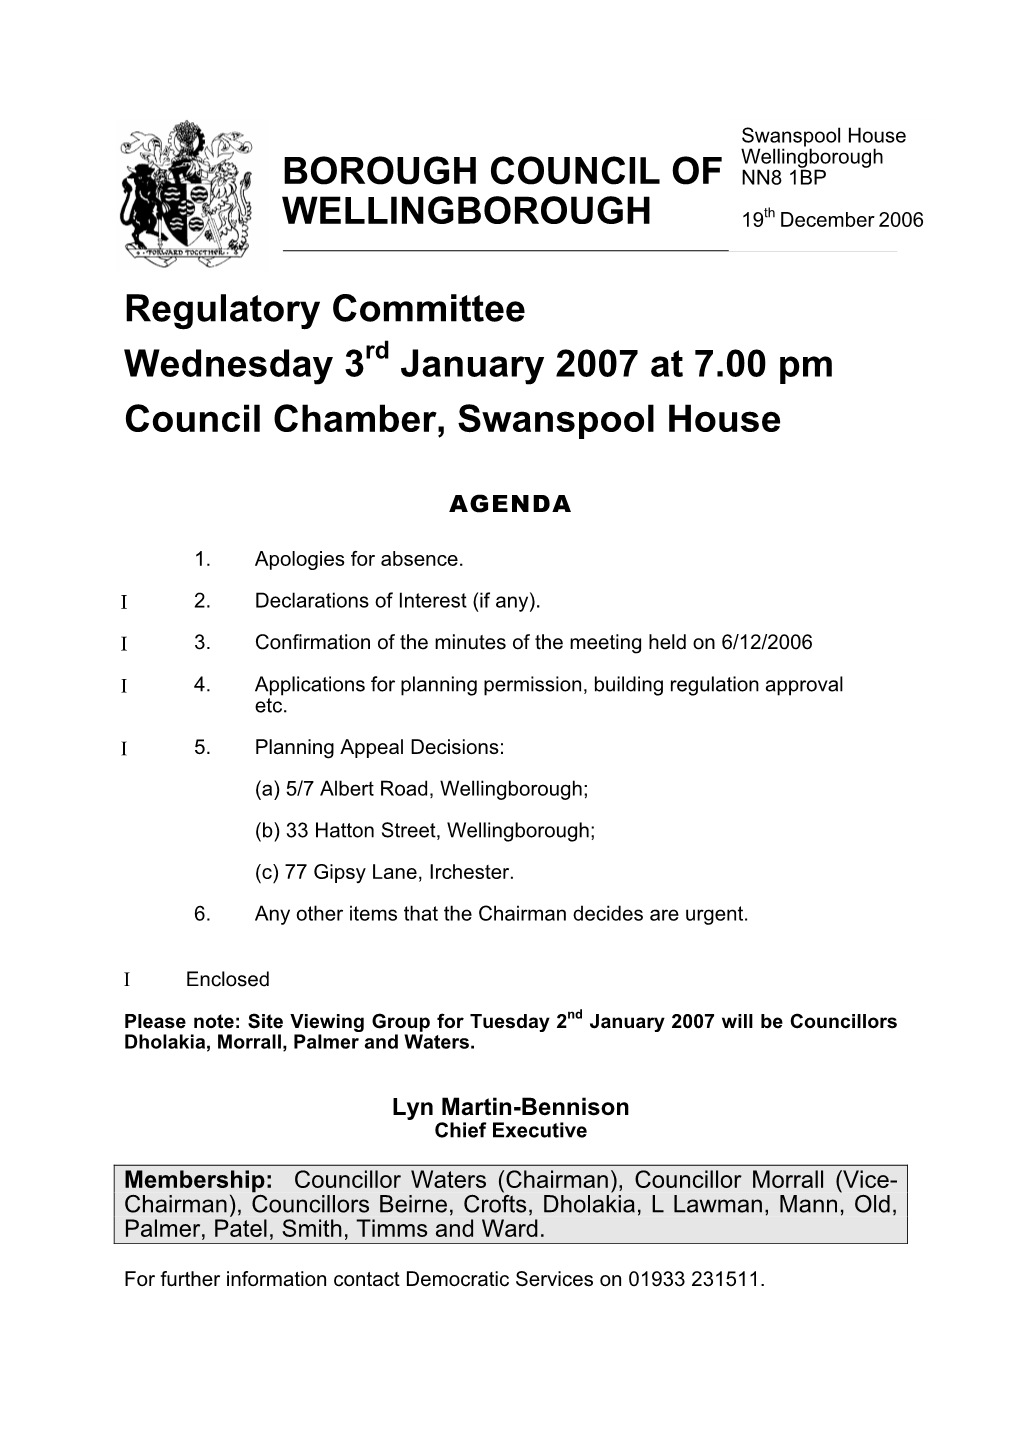 January 2007 at 7.00 Pm Council Chamber, Swanspool House